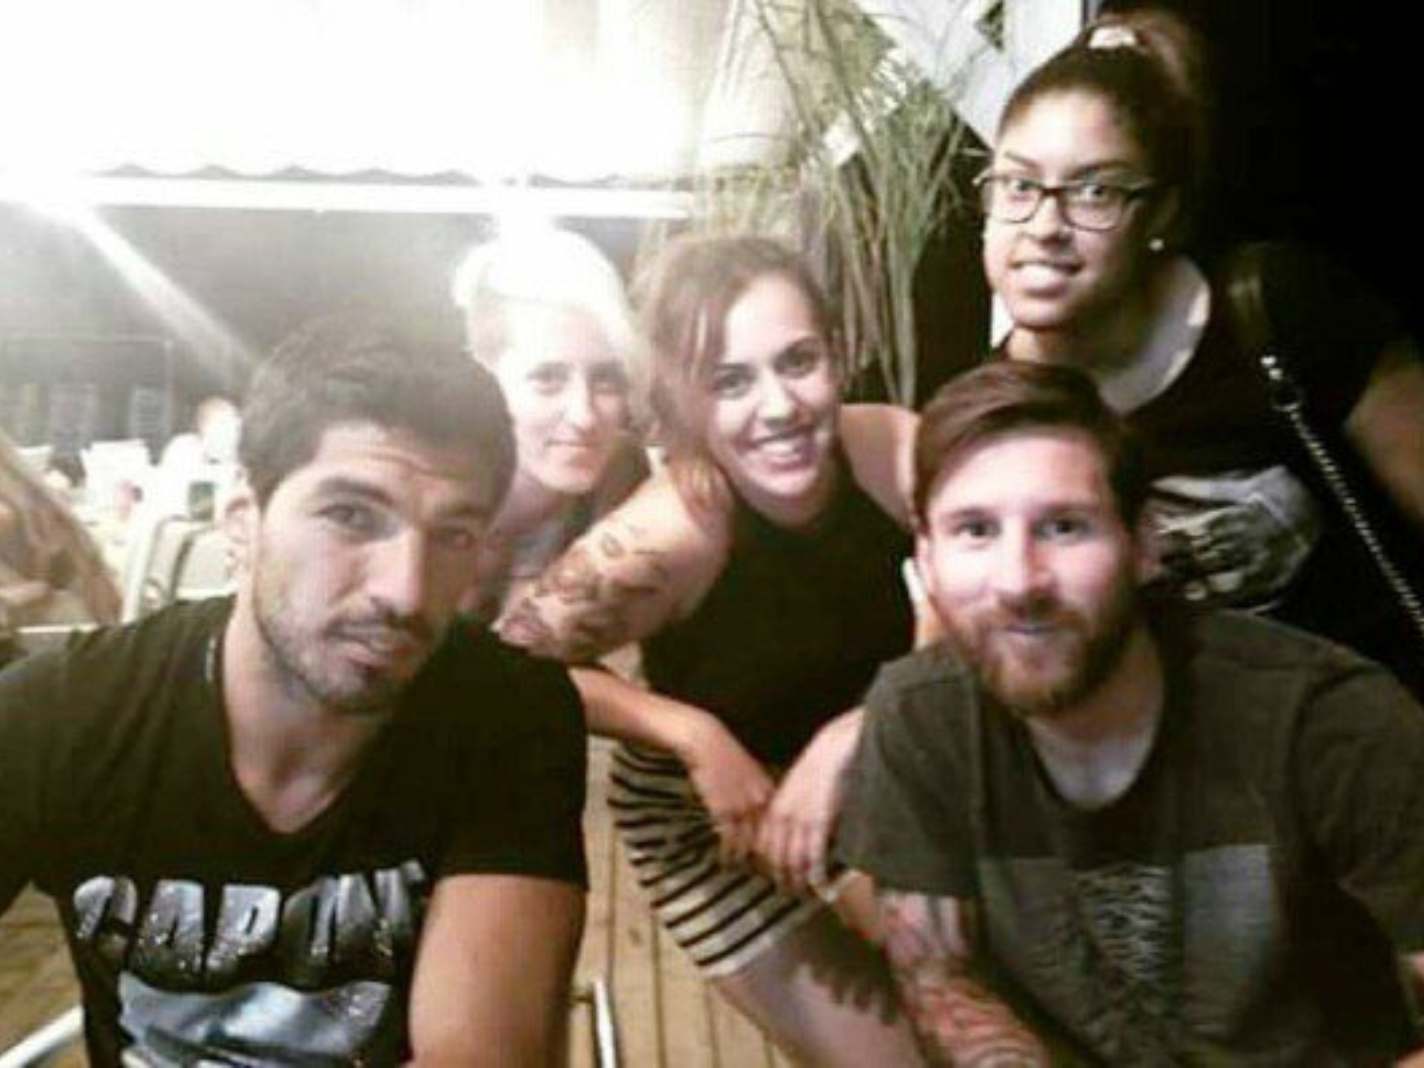 Unpacking the Viral Photo of Lionel Messi in a Joy Division Shirt